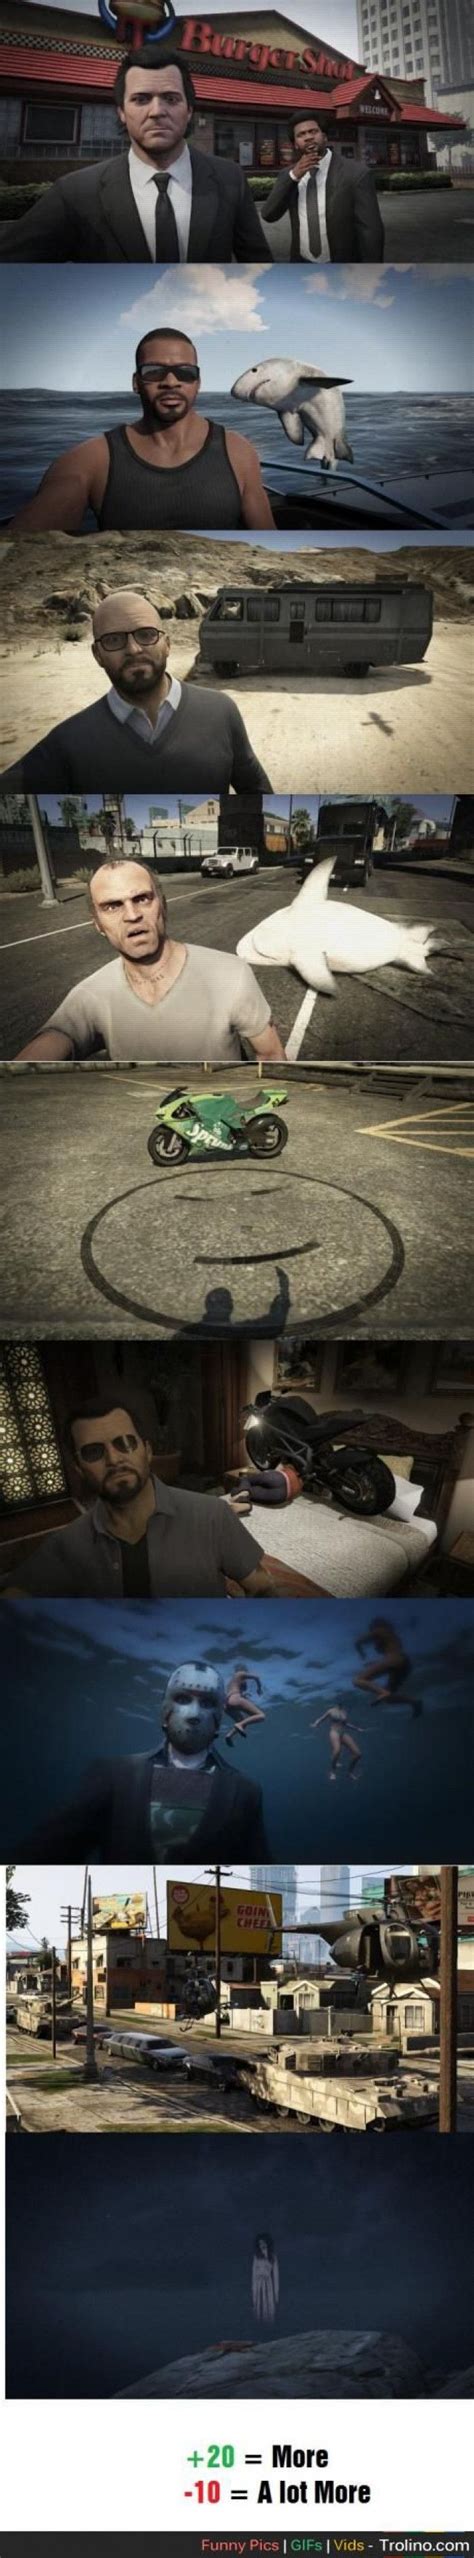 10 Gta V Selfies That Show How Fun The Game Can Be Gta Grand Theft Auto Series Funny Games